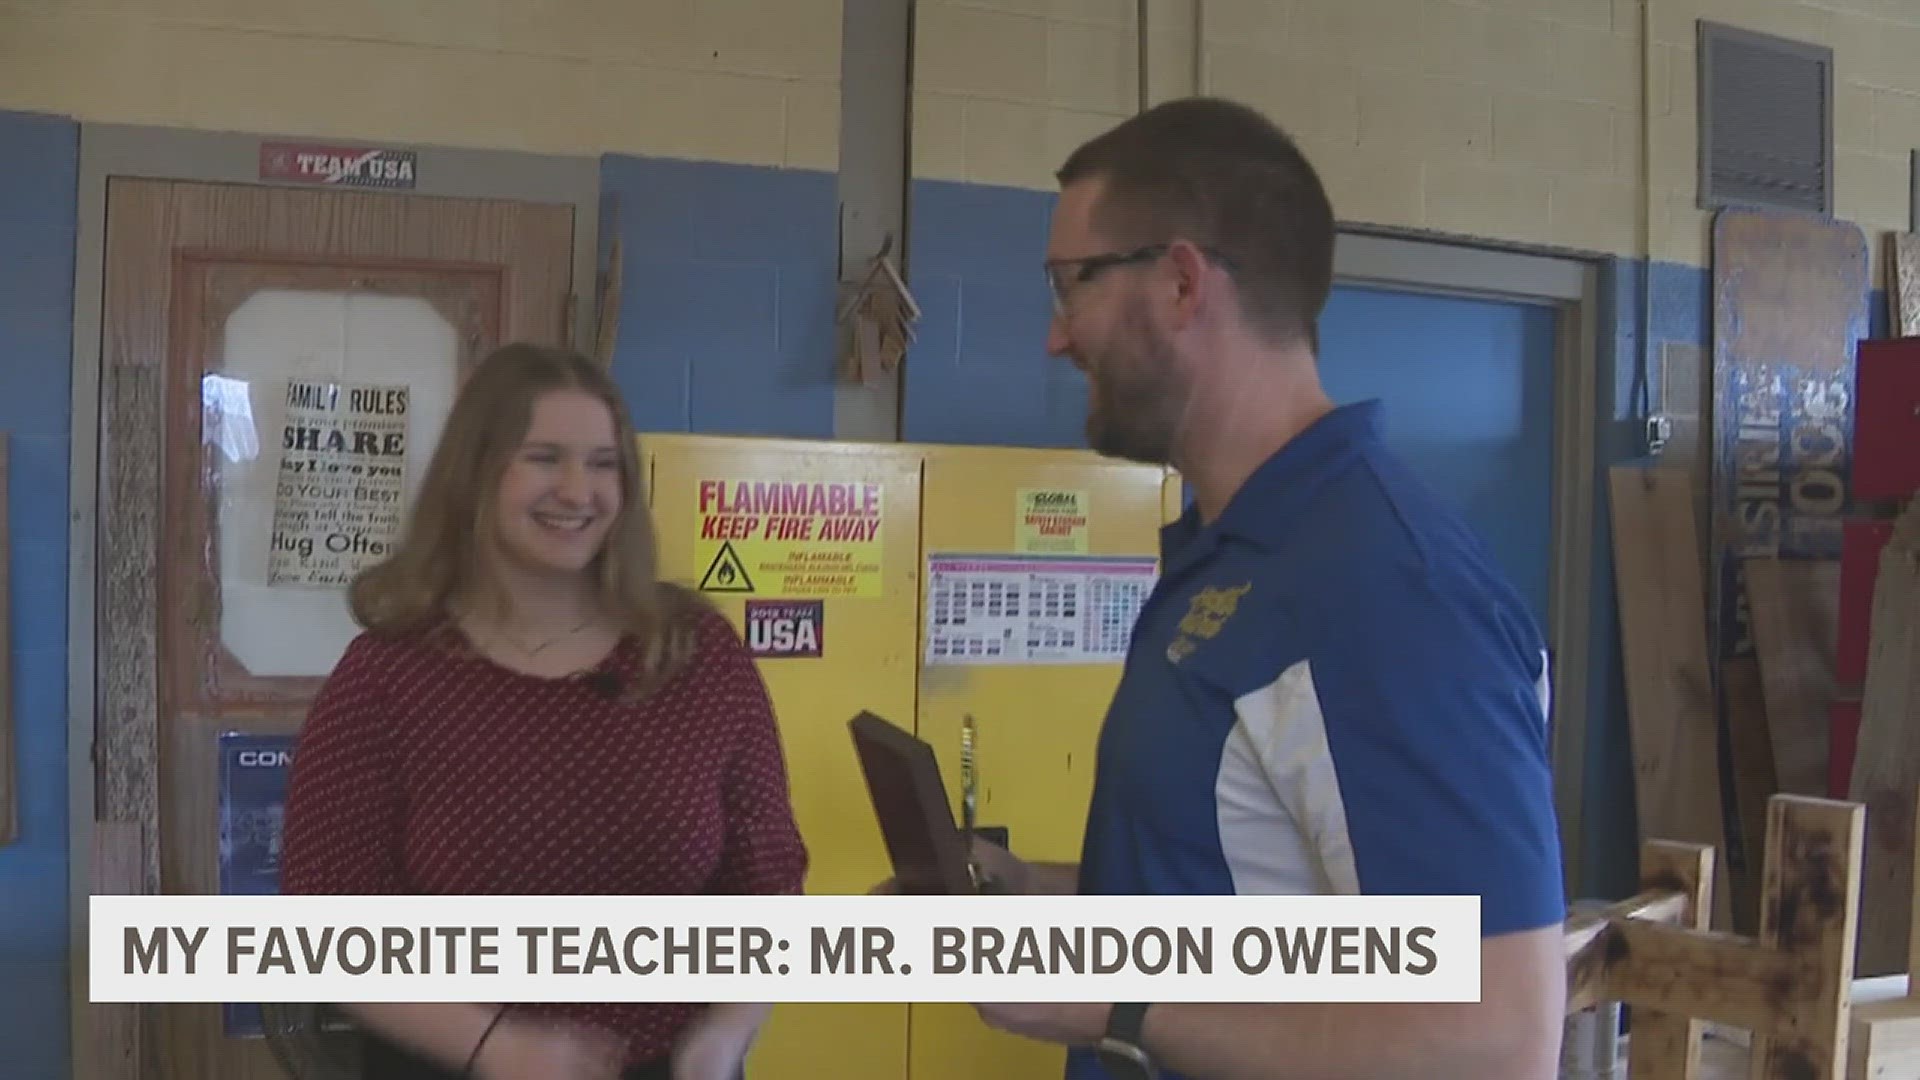 This My Favorite Teacher winner teaches his students with a hands-on approach, helping them with projects they didn't know they could accomplish.